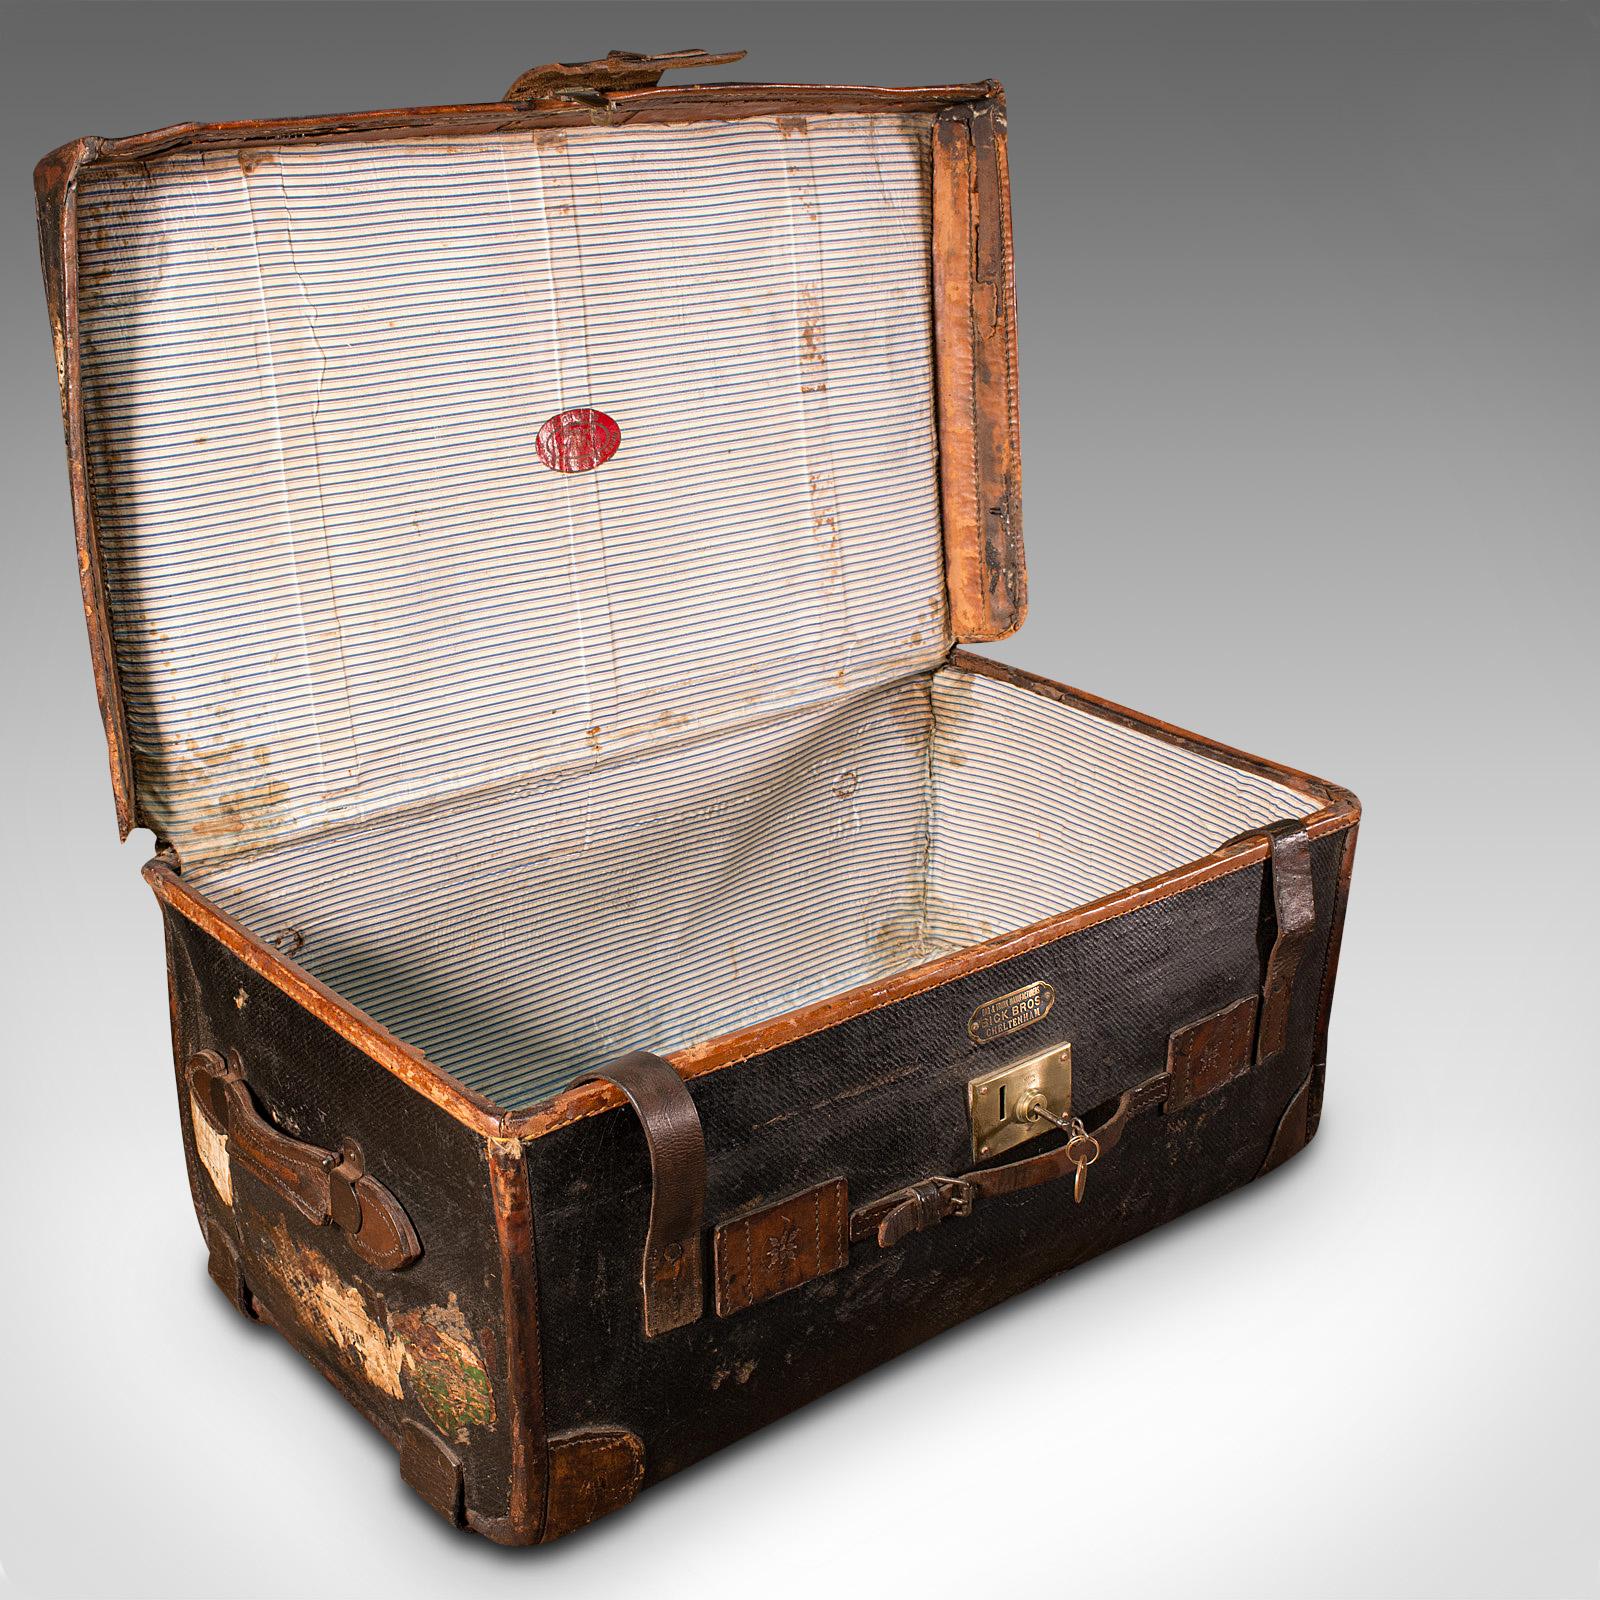 Vintage Overseas Voyage Trunk, English, Leather, Travel Case, Luggage, C.1930 In Good Condition For Sale In Hele, Devon, GB